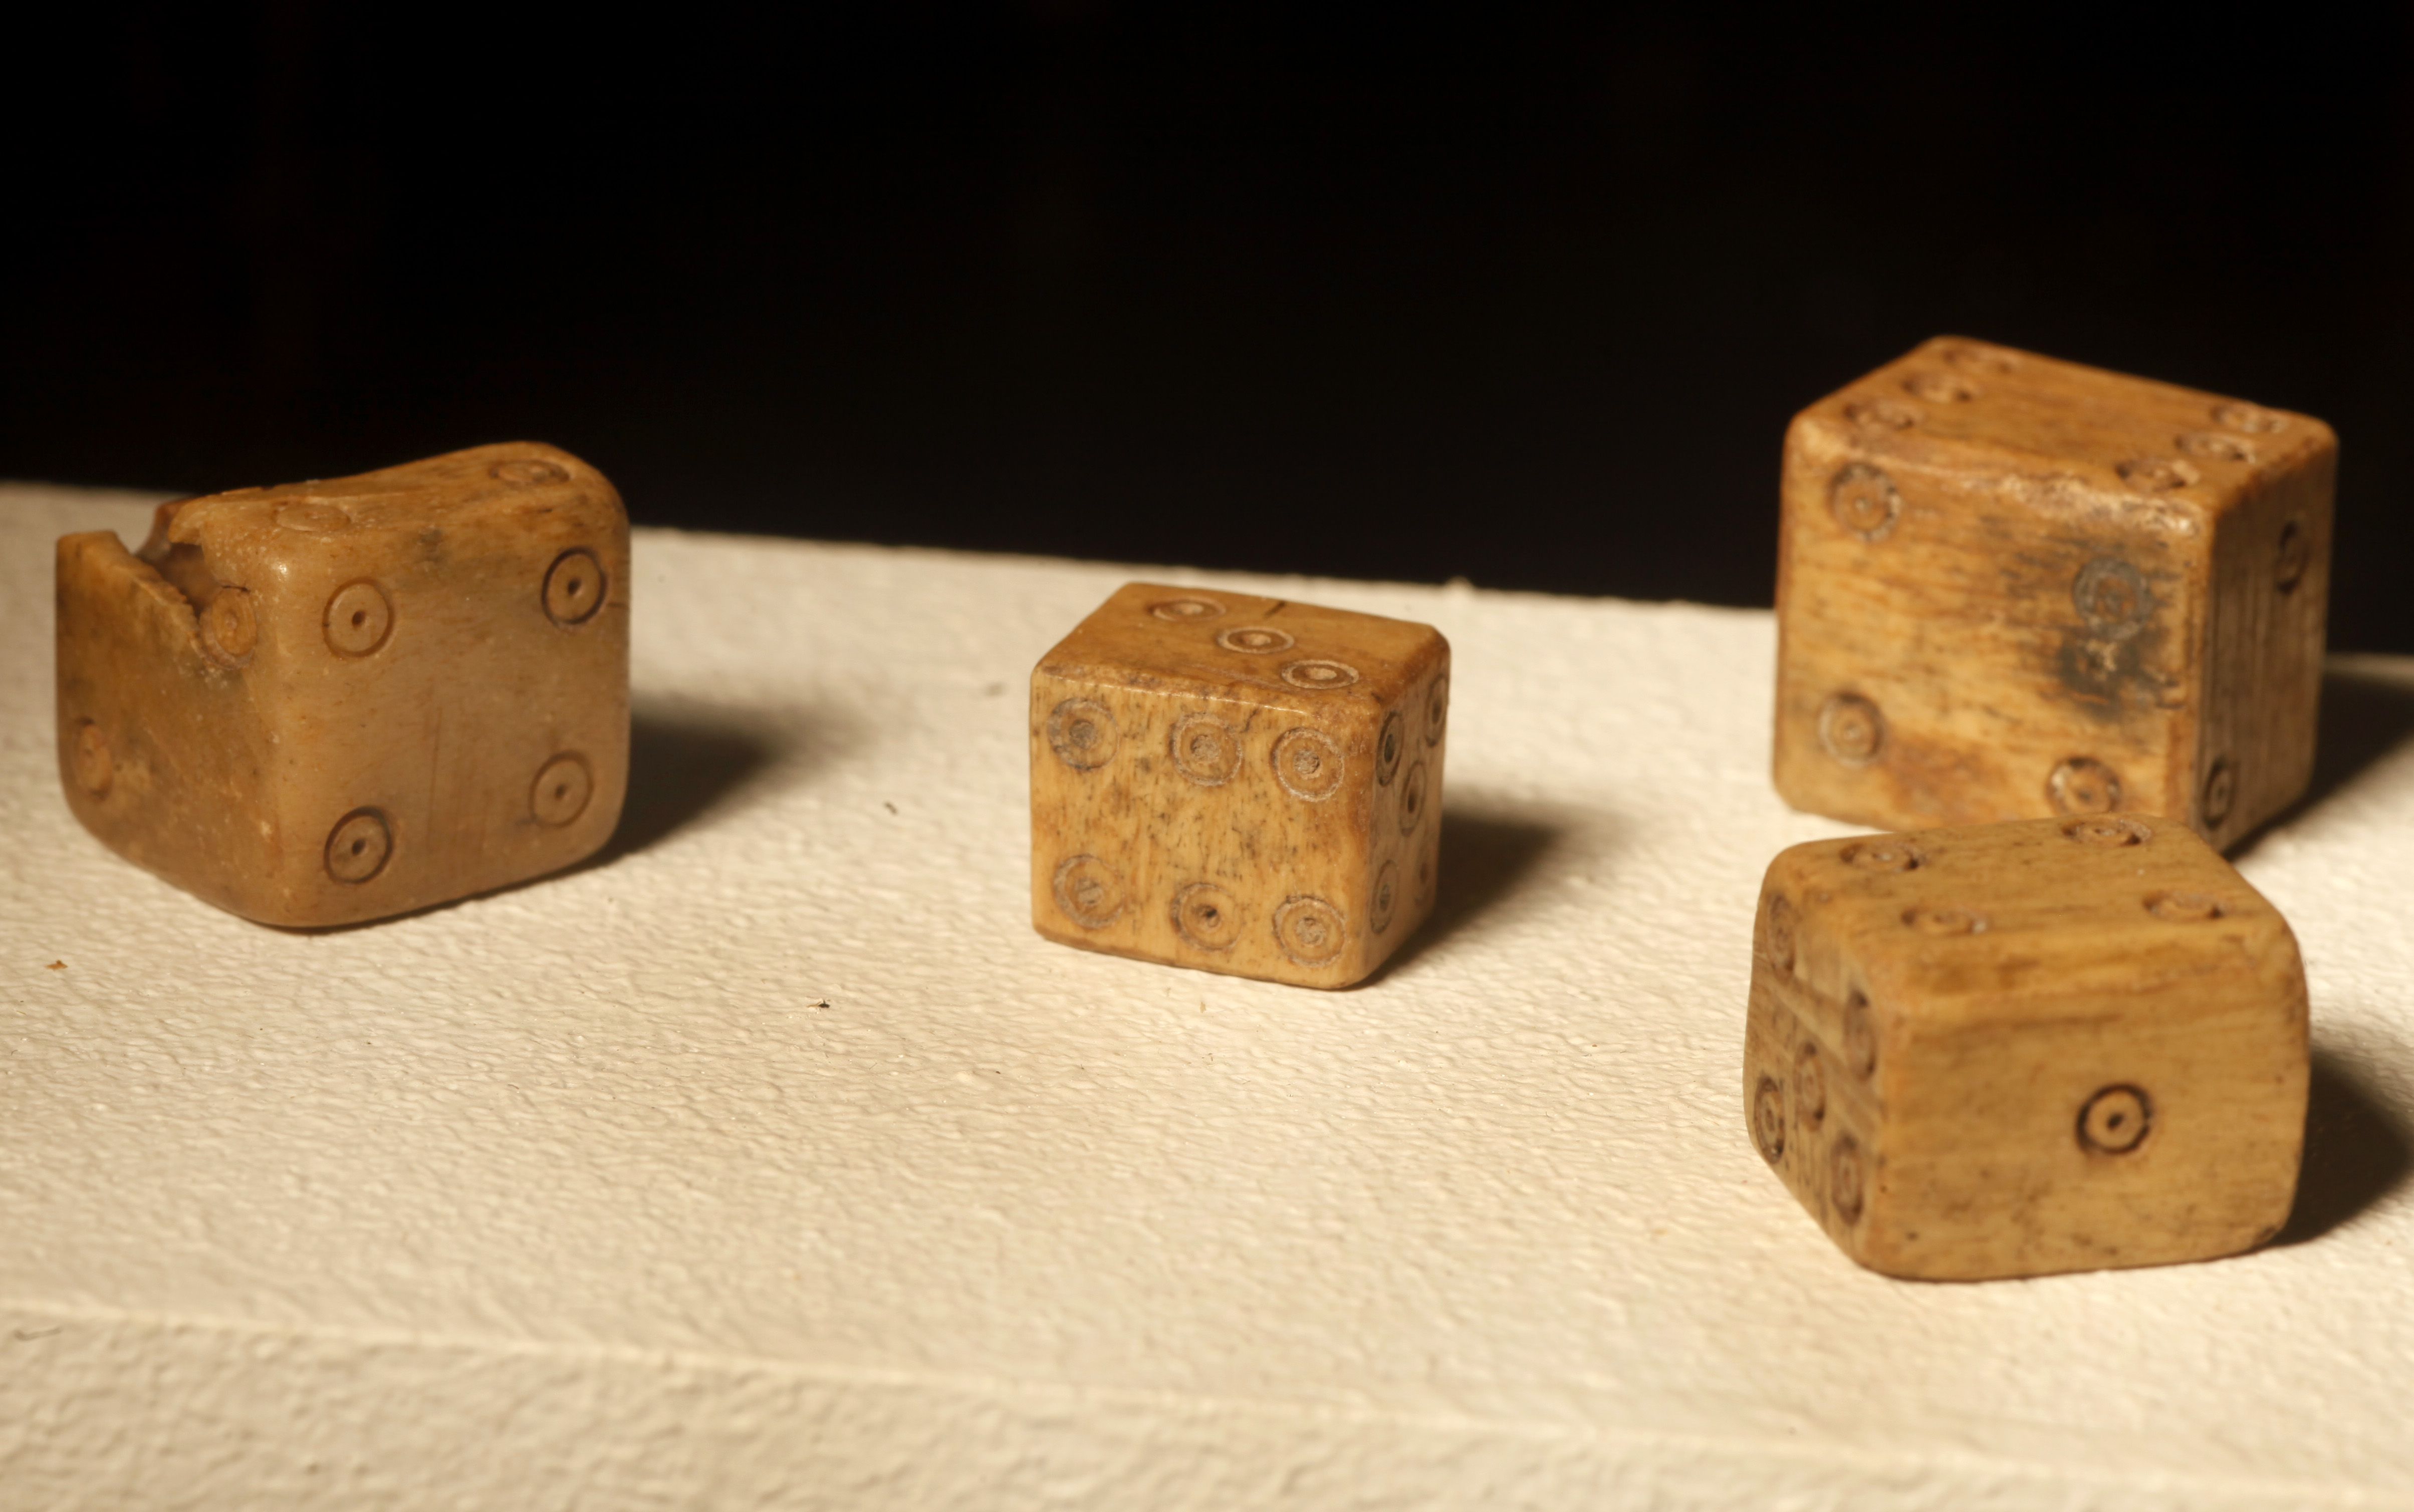 https://hips.hearstapps.com/hmg-prod/images/roman-dice-game-artifacts-from-the-arles-rhone-3-are-news-photo-1659985722.jpg